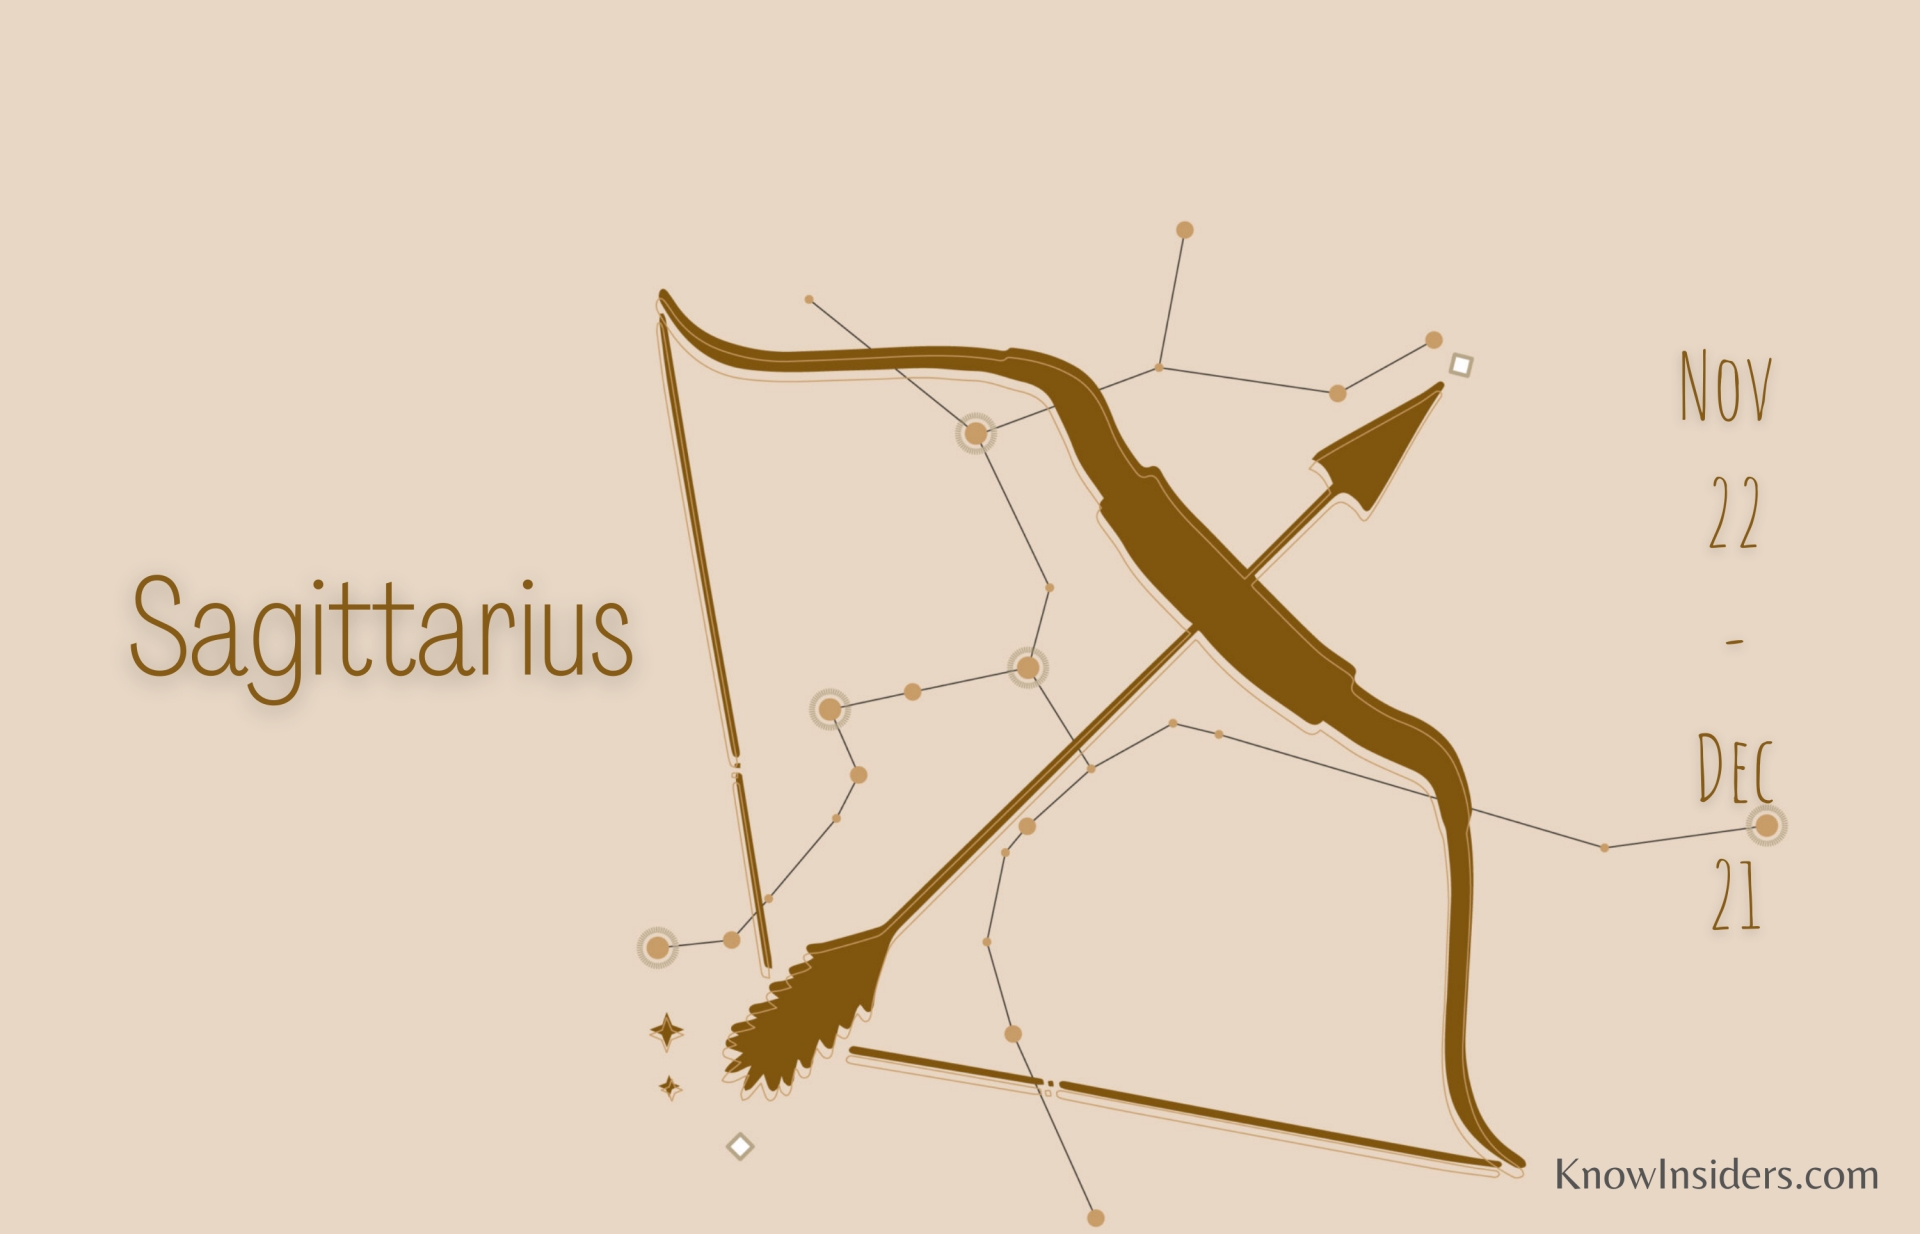 sagittarius zodiac sign dates meaning and personal traits